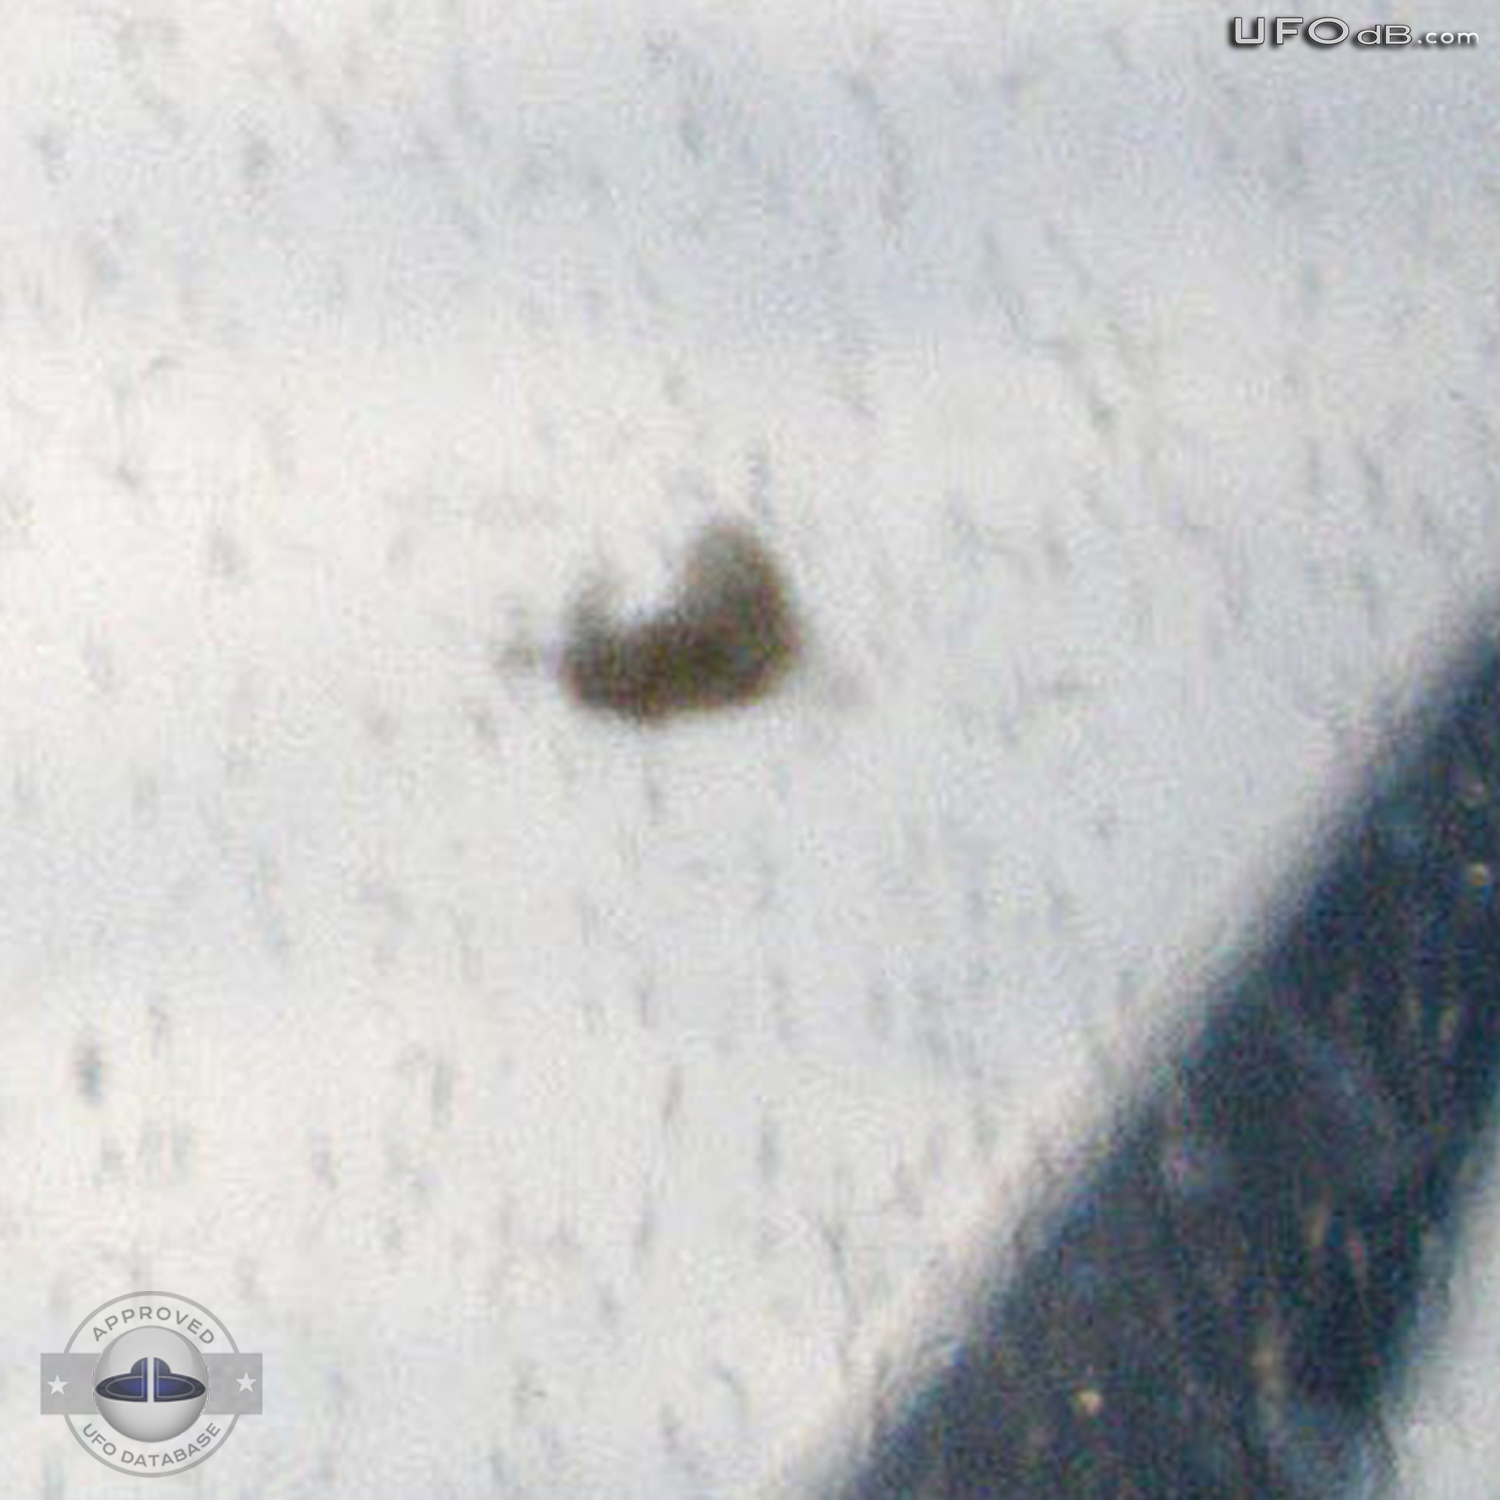 Cloaking UFO near wing of flying Airplane in Australia | January 2011 UFO Picture #243-4